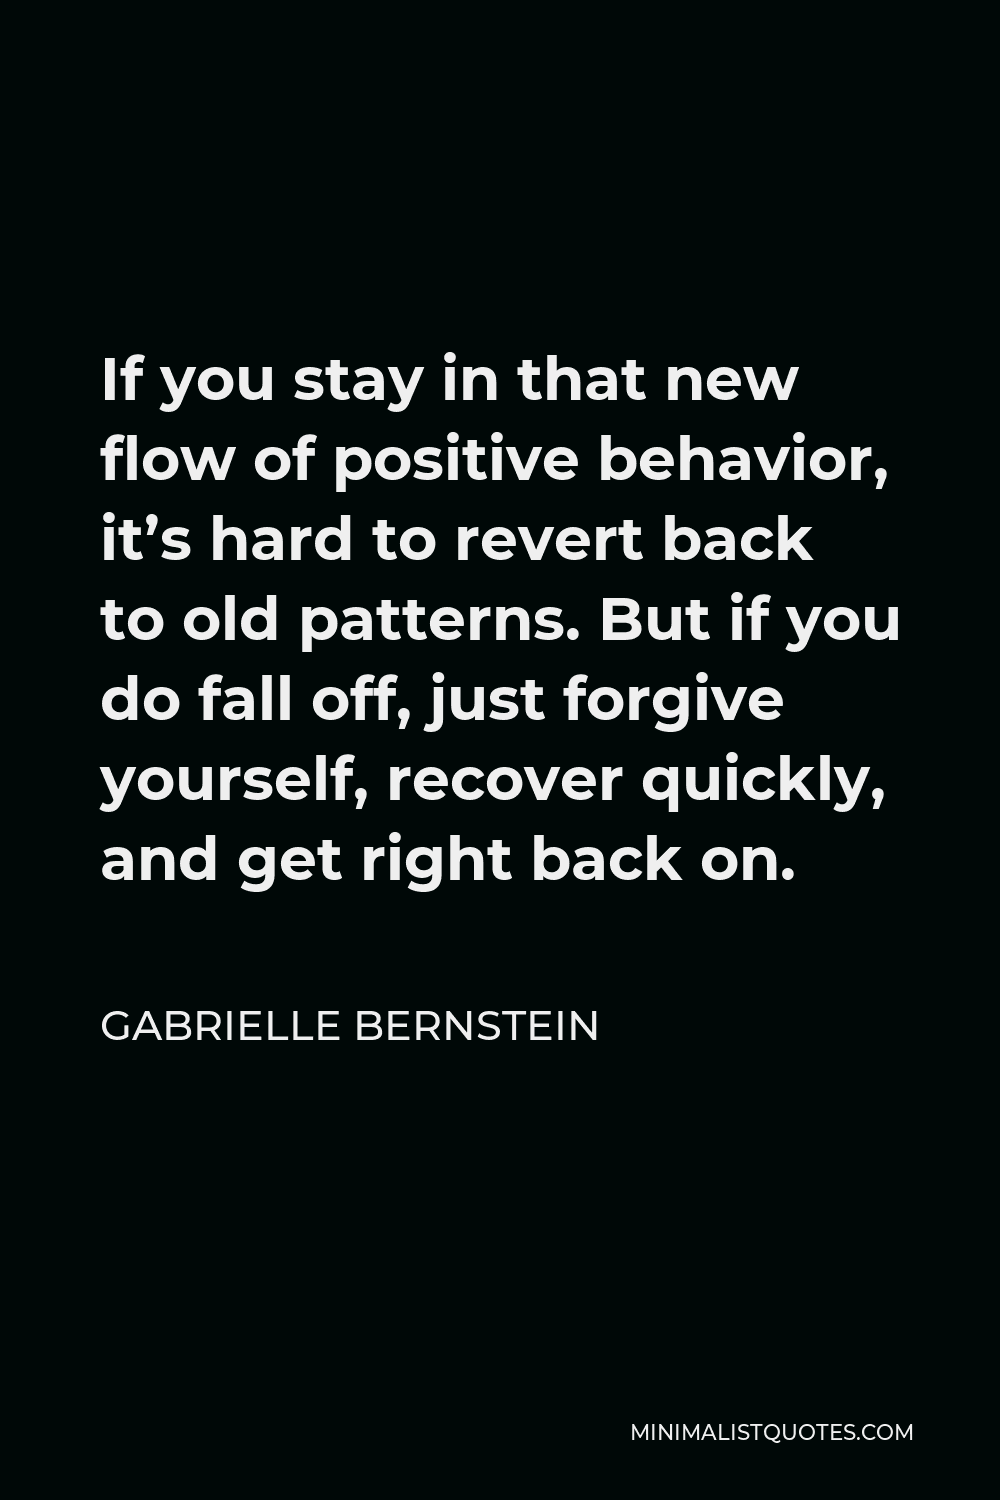 Gabrielle Bernstein Quote - If you stay in that new flow of positive behavior, it’s hard to revert back to old patterns. But if you do fall off, just forgive yourself, recover quickly, and get right back on.